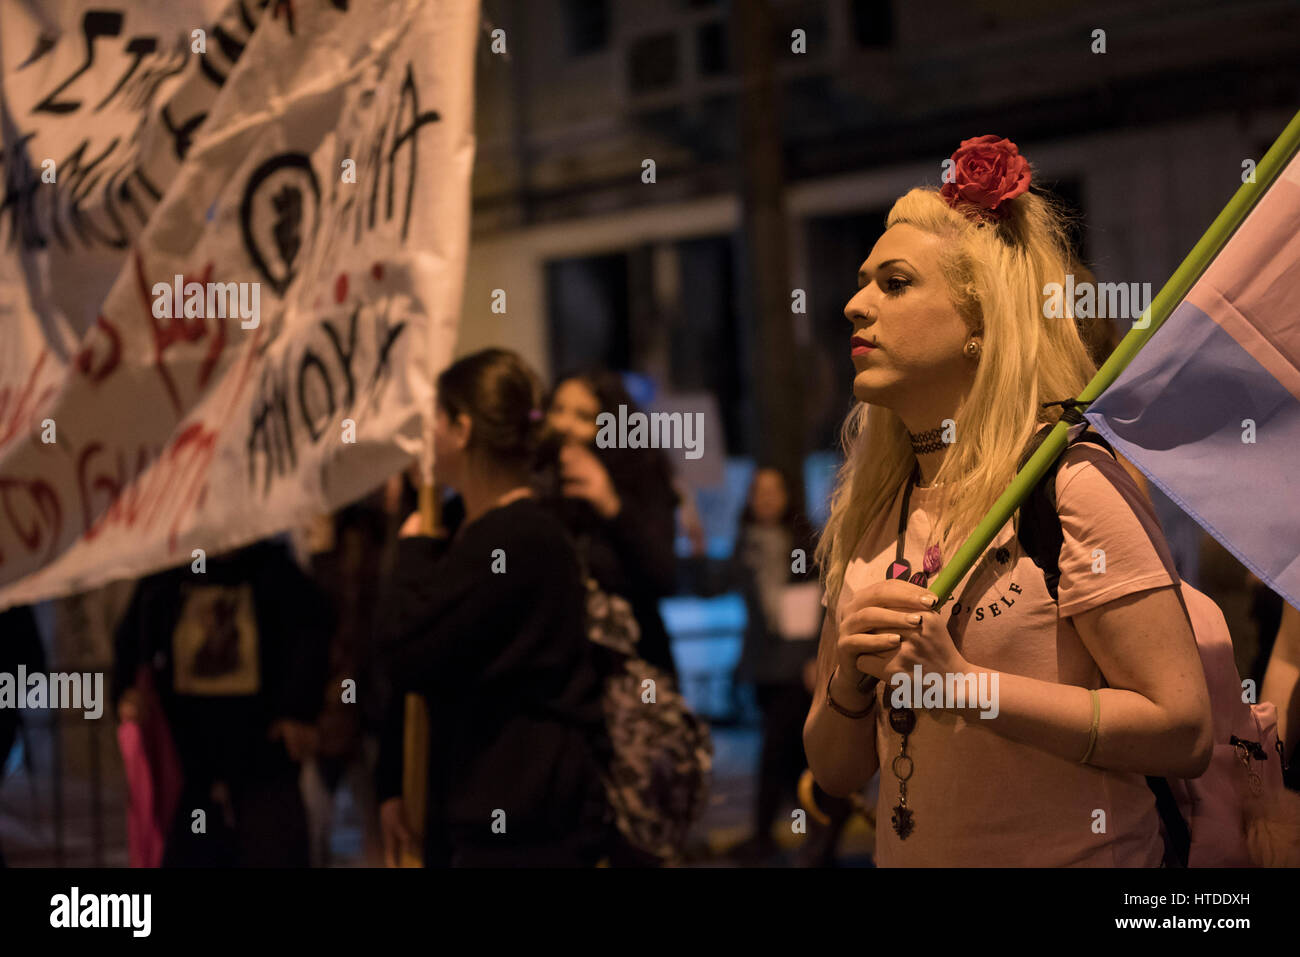 Women and men march in the streets of Athens shouting slogans and holding placards. Feminist, leftist and human rights organizations staged a demonstration to honor International Women's Day and demand equal rights. © Nikolas Georgiou / Alamy Live News Stock Photo